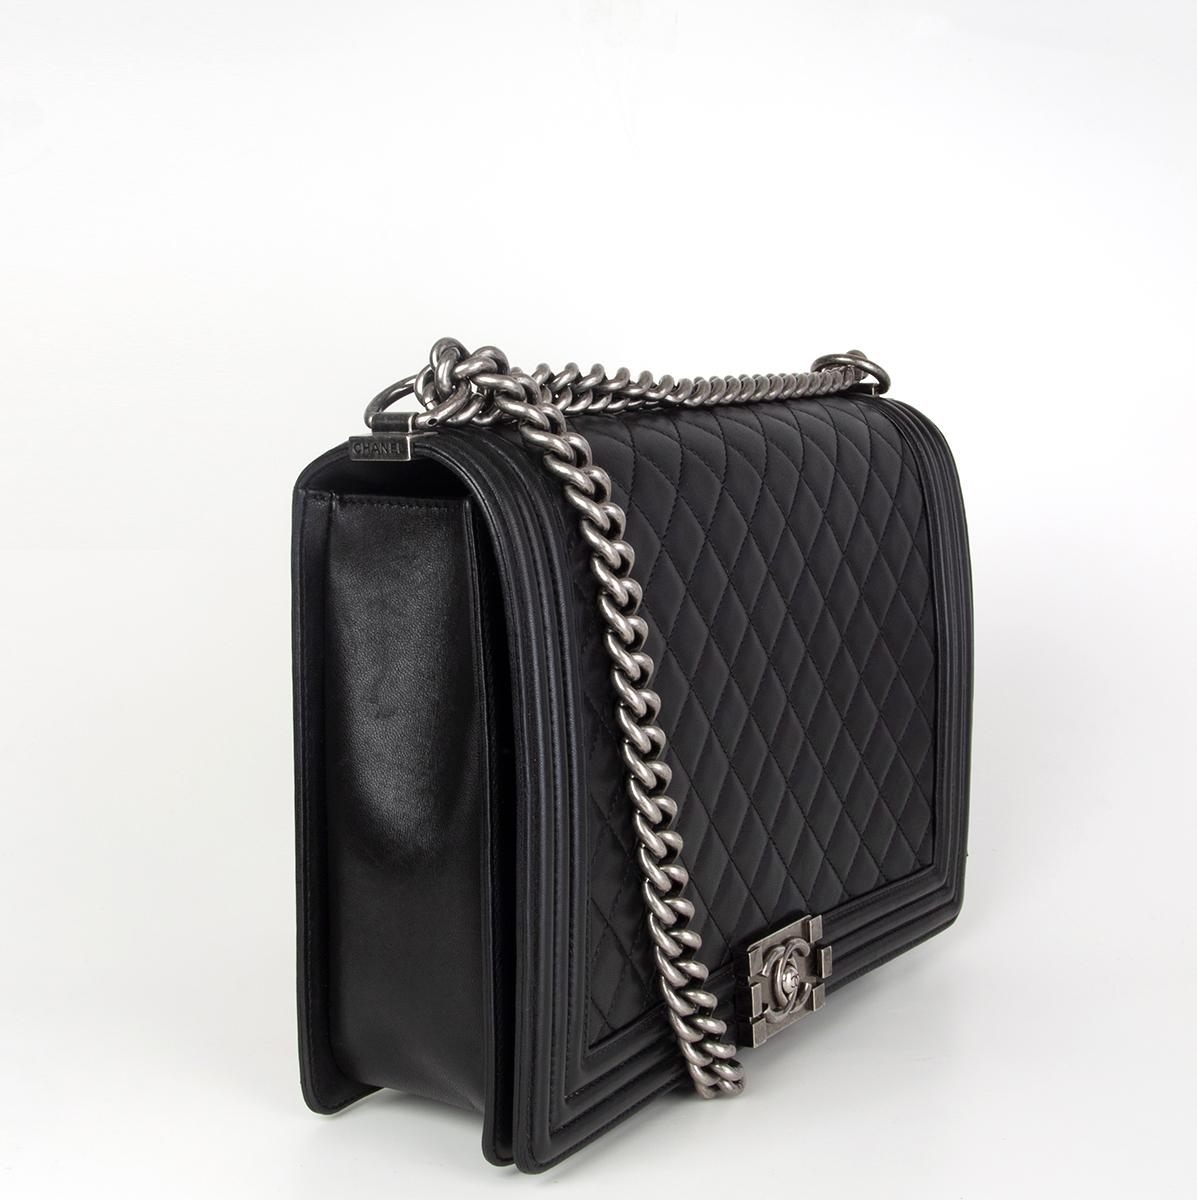 Chanel 'Boy' large shoulder bag in black quilted calfskin leather featuring antique silver-tone hardware. This is the original size that's no longer available. Opens with a CC push-lock and is lined in grey gros grain fabric with two open pockets